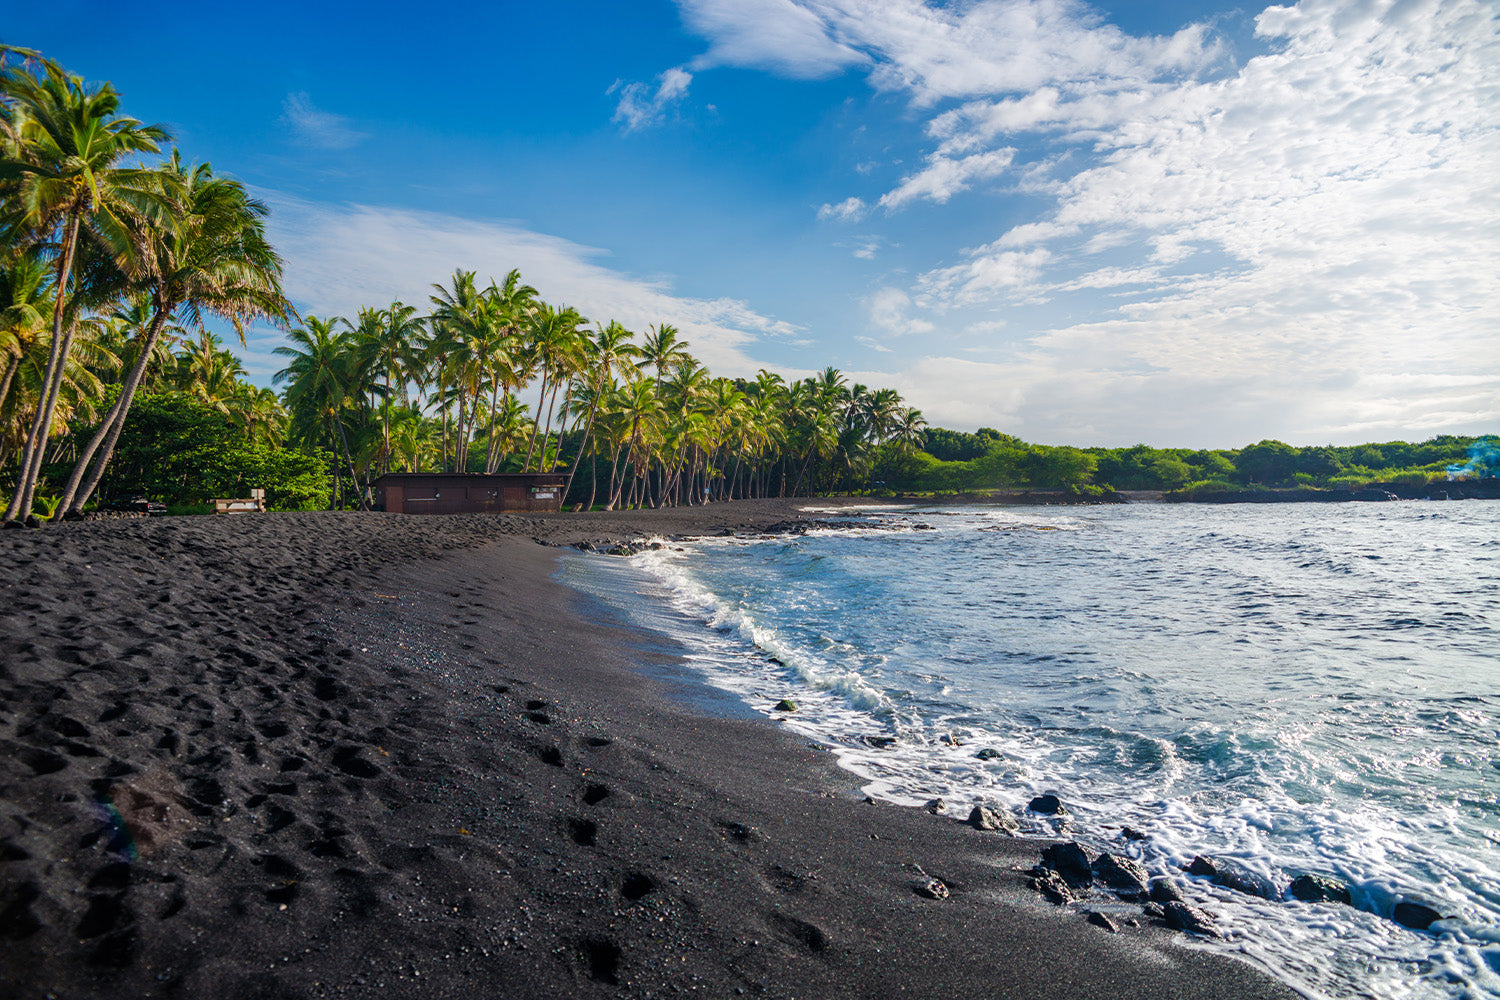 6 Black Sand Beaches That Are Must See Destinations Andie Swim